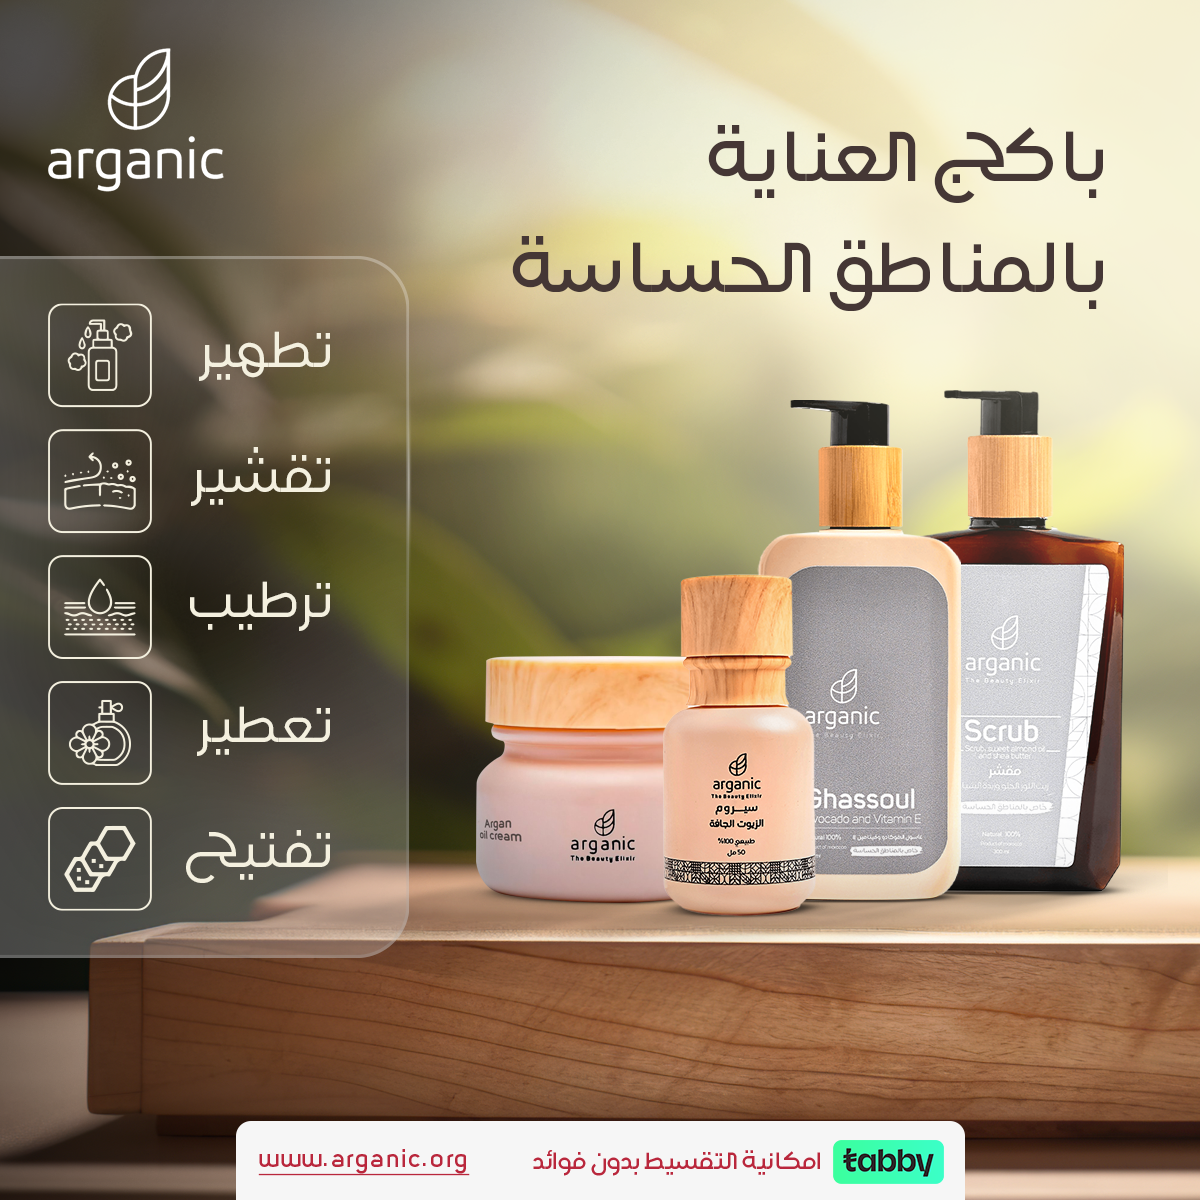 Natural skincare products array with icons and Arabic texts.